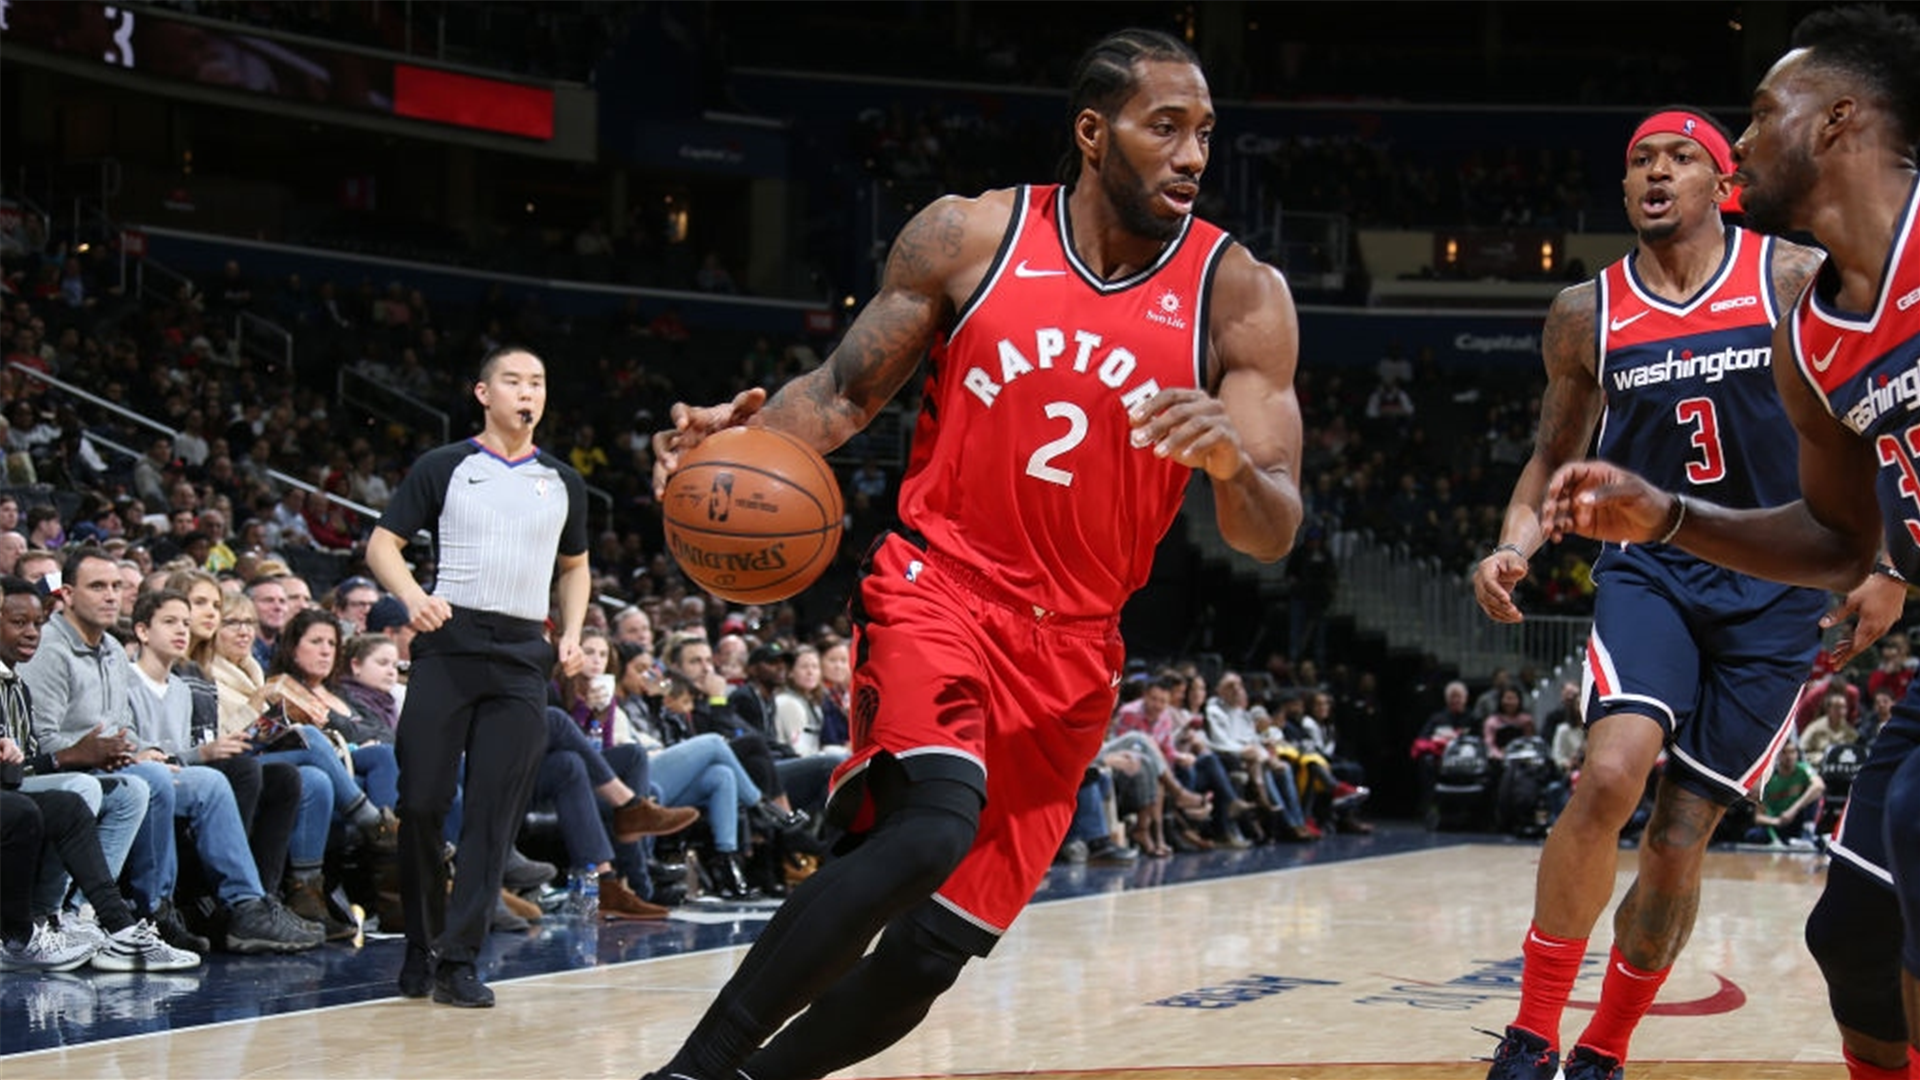 Kawhi Leonard's team-high 41 points leads the Raptors past the Washington Wizards in ...